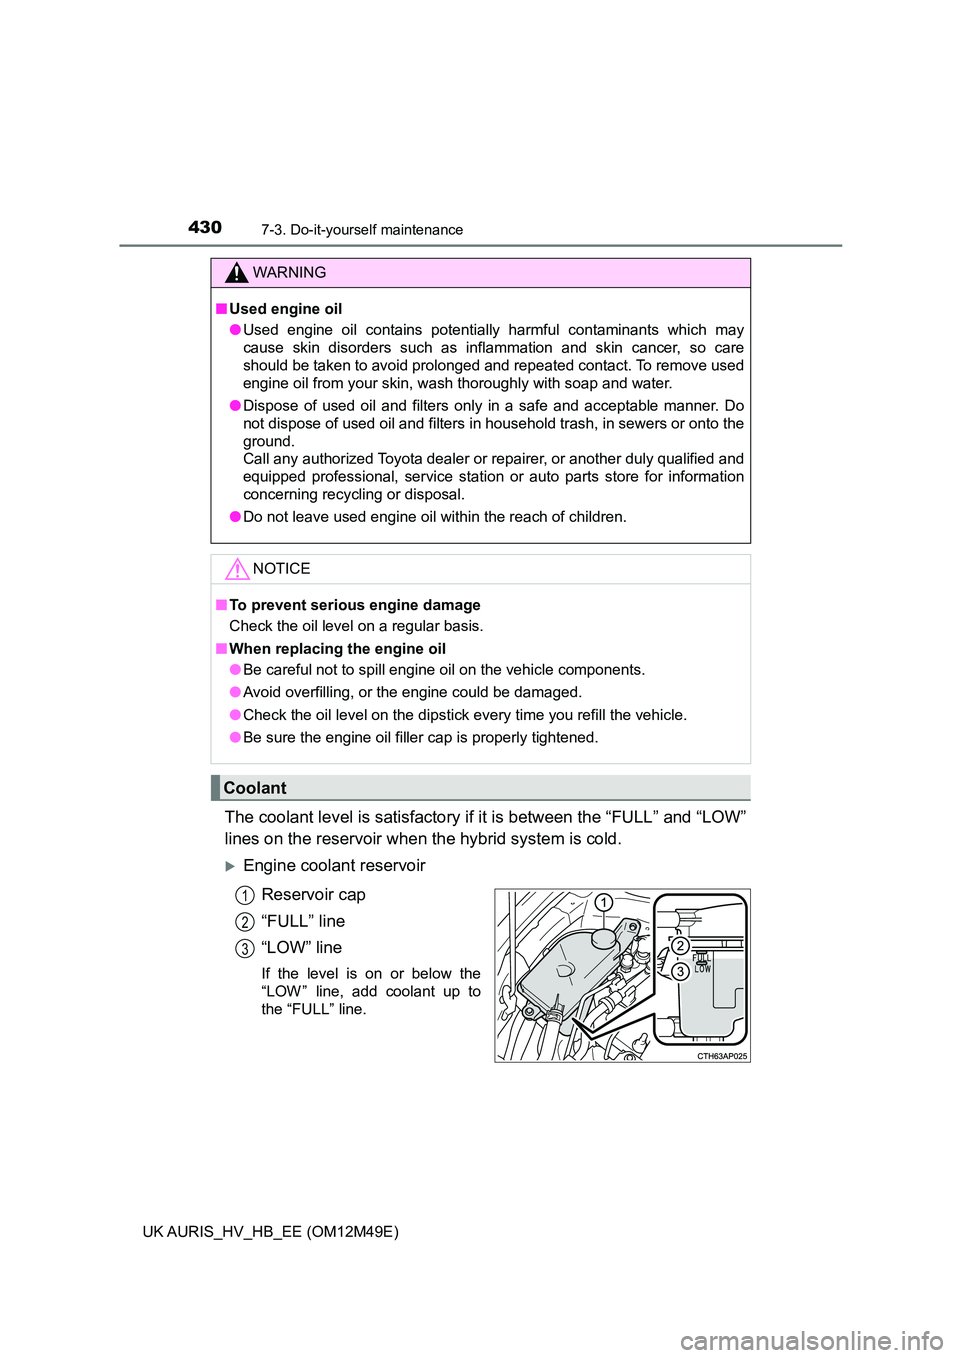 TOYOTA AURIS 2018  Owners Manual (in English) 4307-3. Do-it-yourself maintenance
UK AURIS_HV_HB_EE (OM12M49E)
The coolant level is satisfactory if it is between the “FULL” and “LOW” 
lines on the reservoir when th e hybrid system is cold.